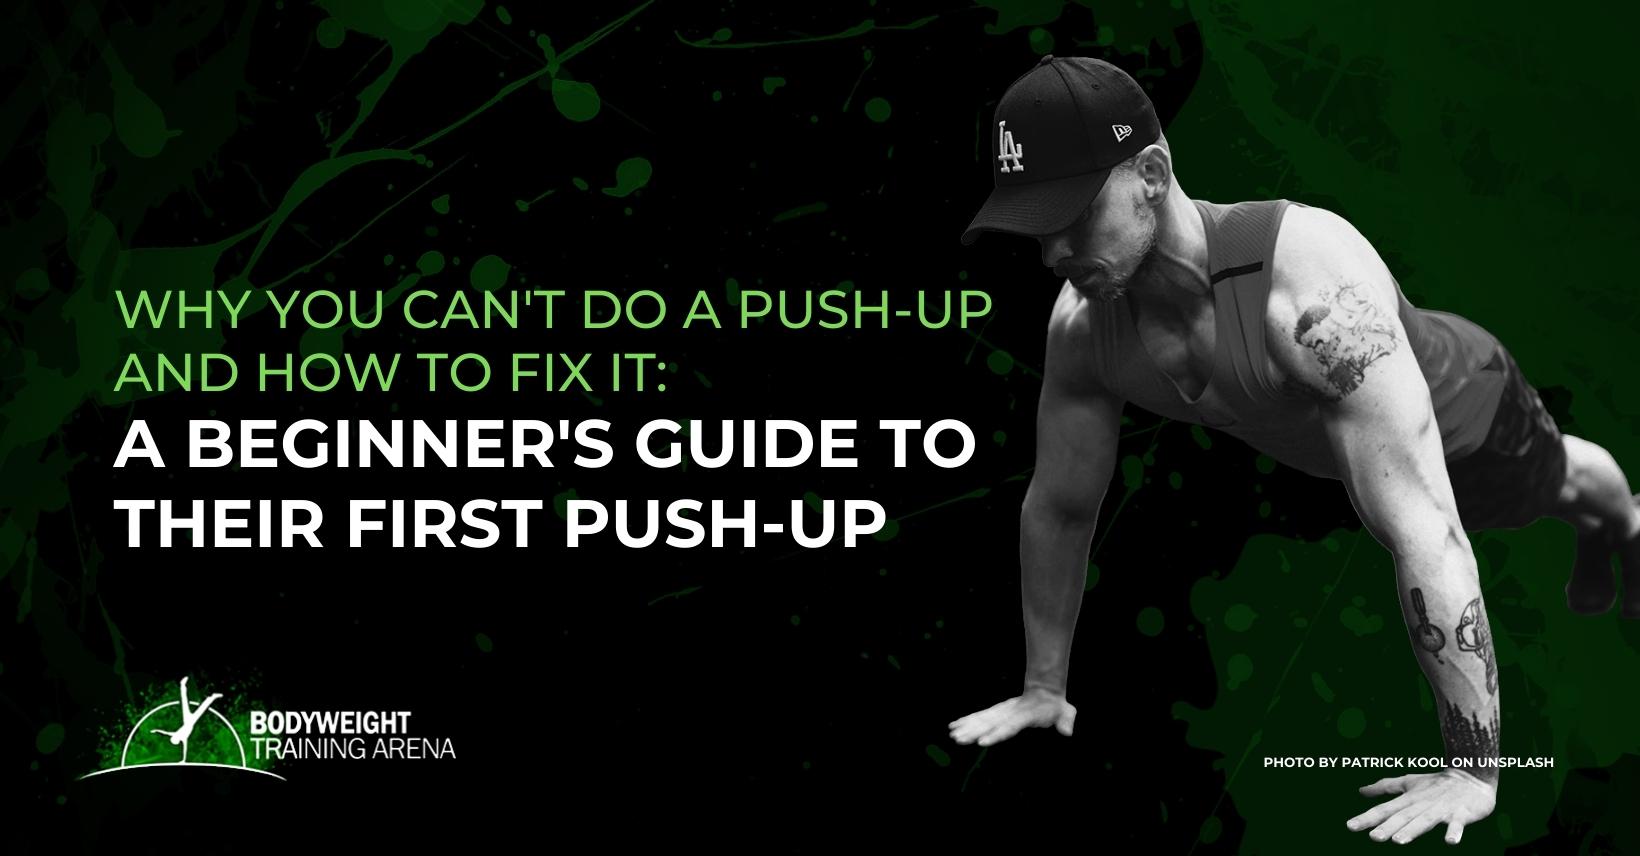 Why You Can’t Do a Push-Up and How to Fix It: A Beginner’s Guide to Your First Push-up